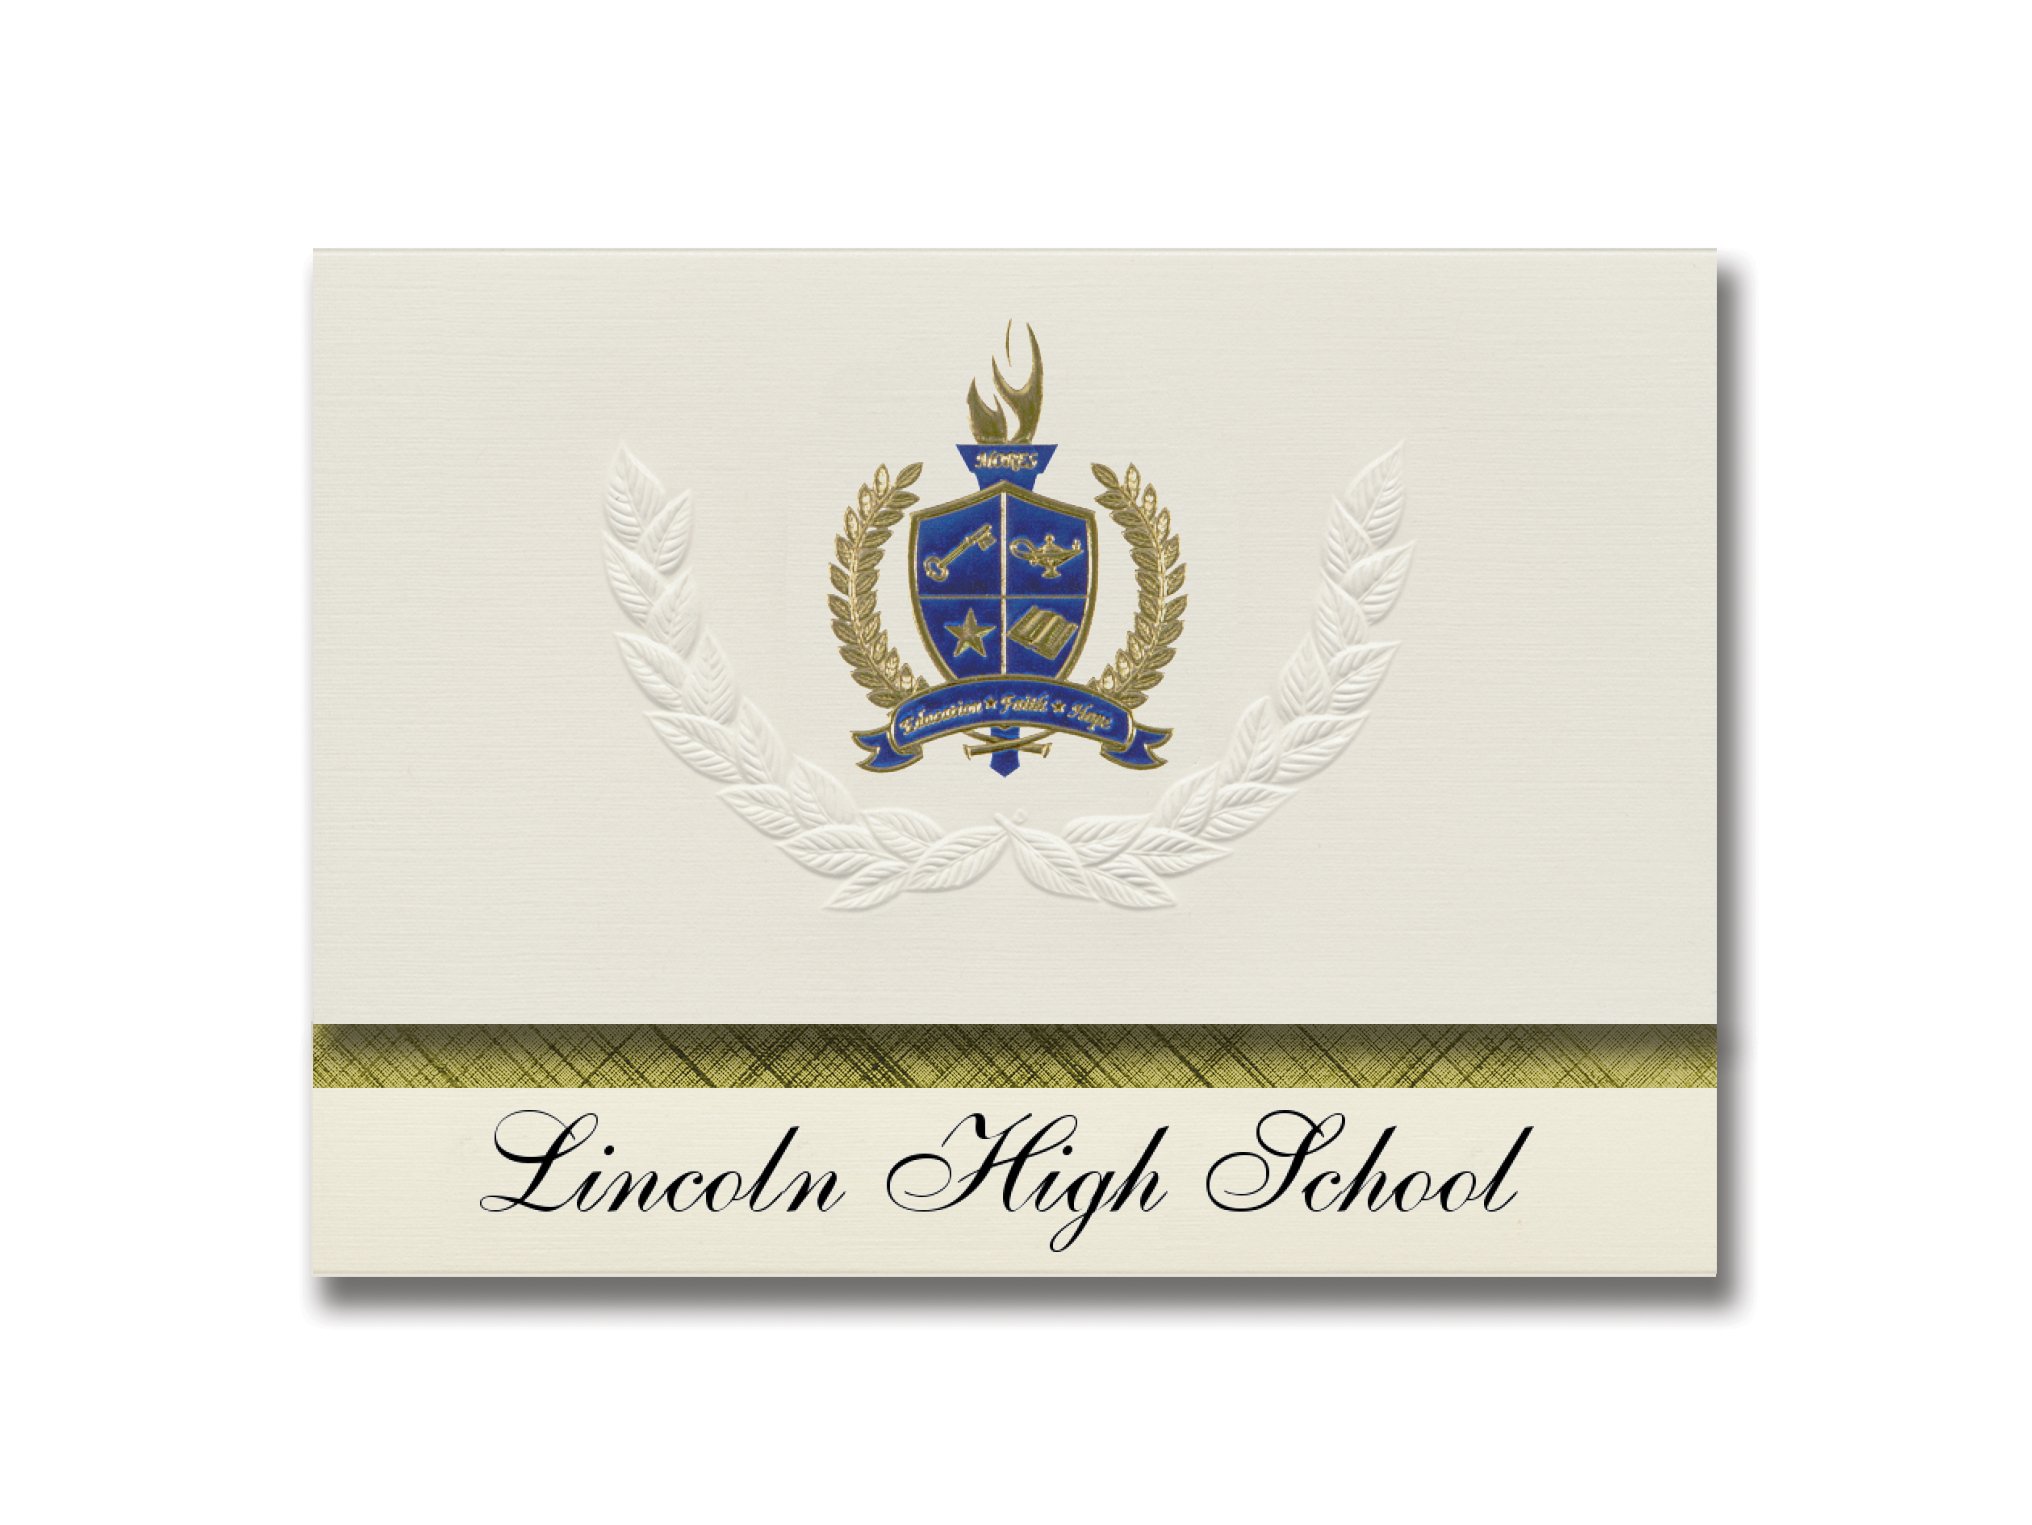 Signature Announcements Lincoln High School (Wisconsin Rapids, WI) Graduation Announcements, Presidential style, Basic package of 25 with Gold & Bl...